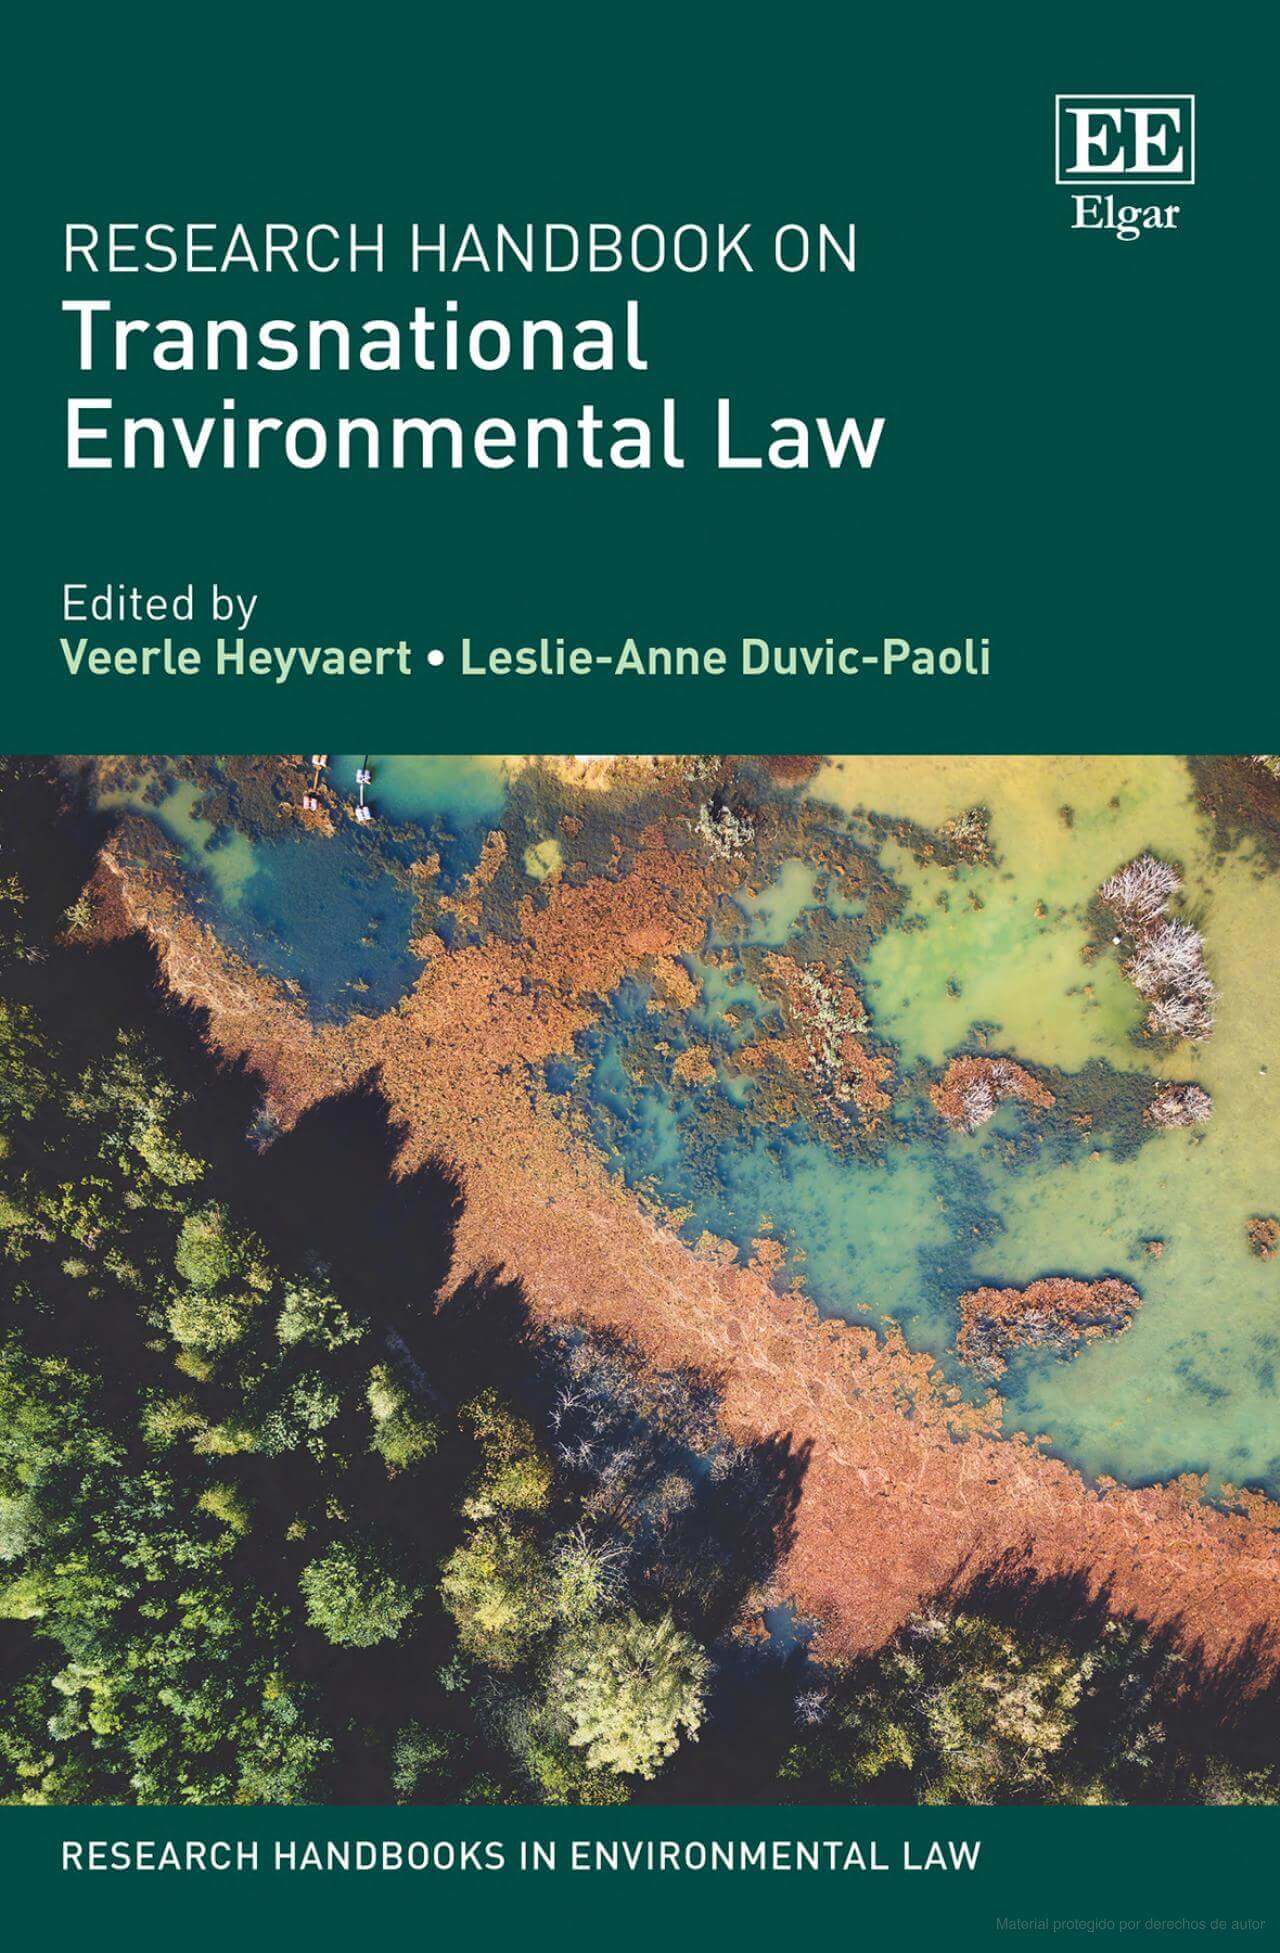 research topics on environmental law